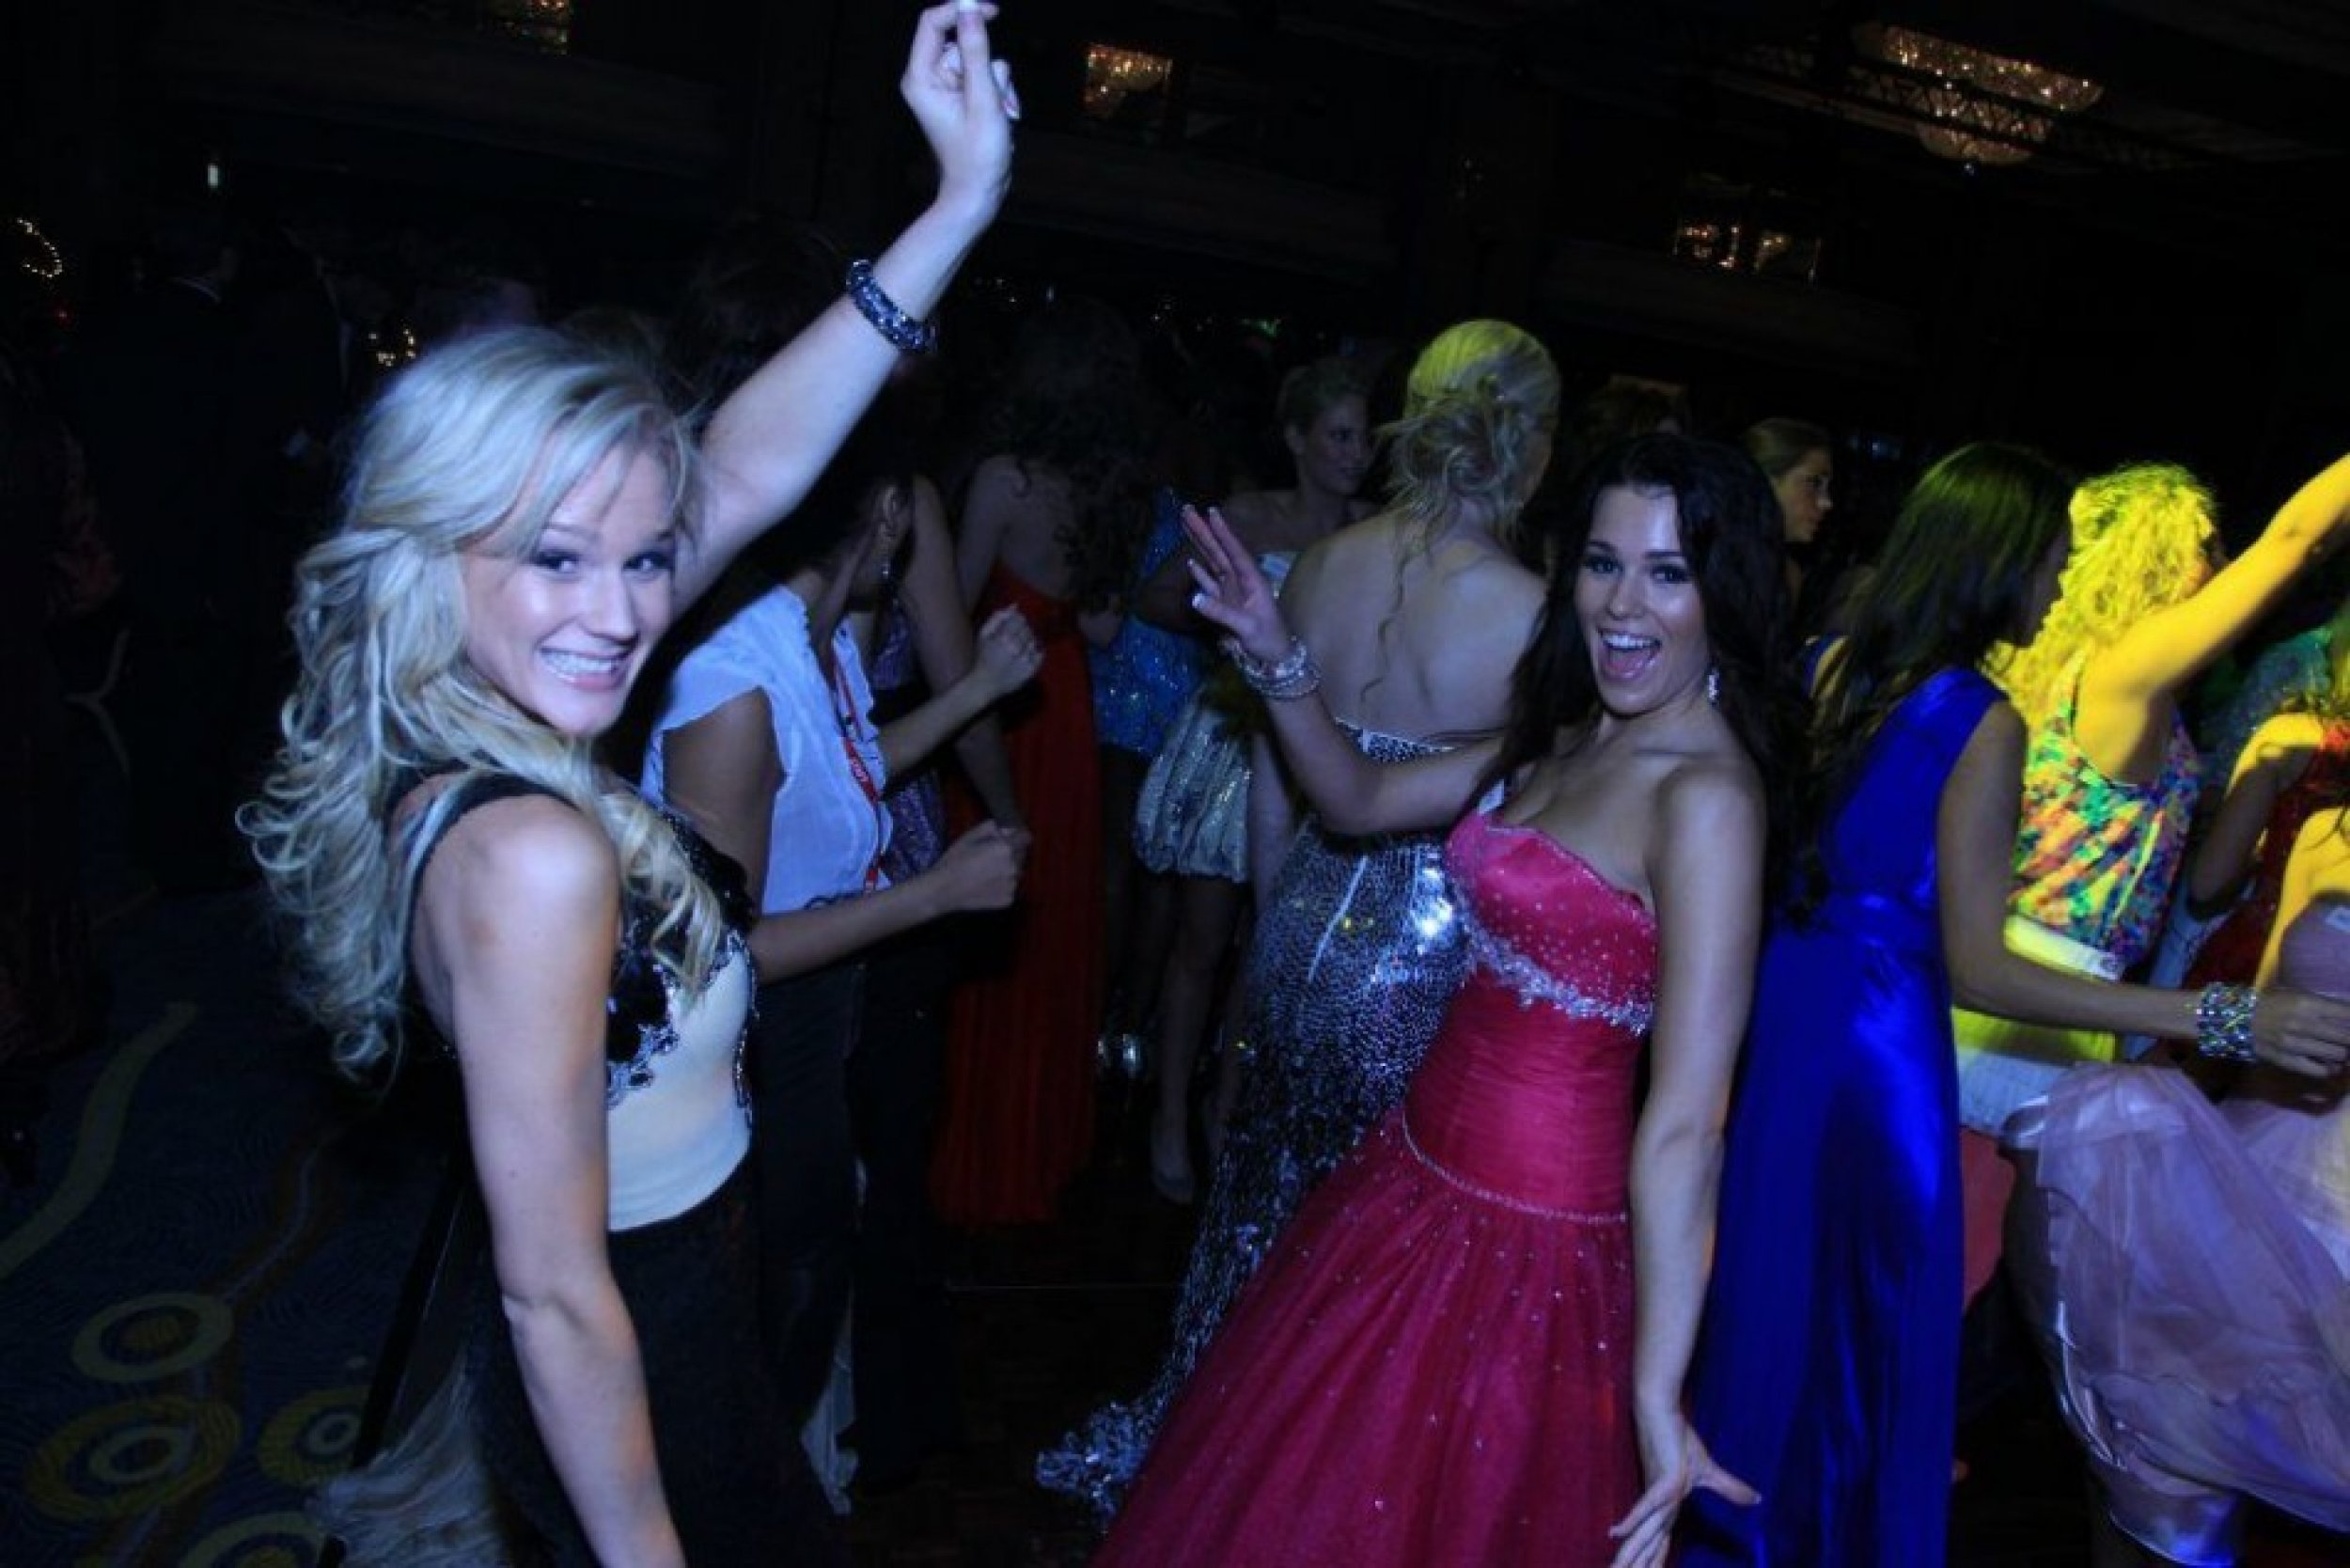 Miss World 2011 Contestants Party Hard Ahead of Pageant